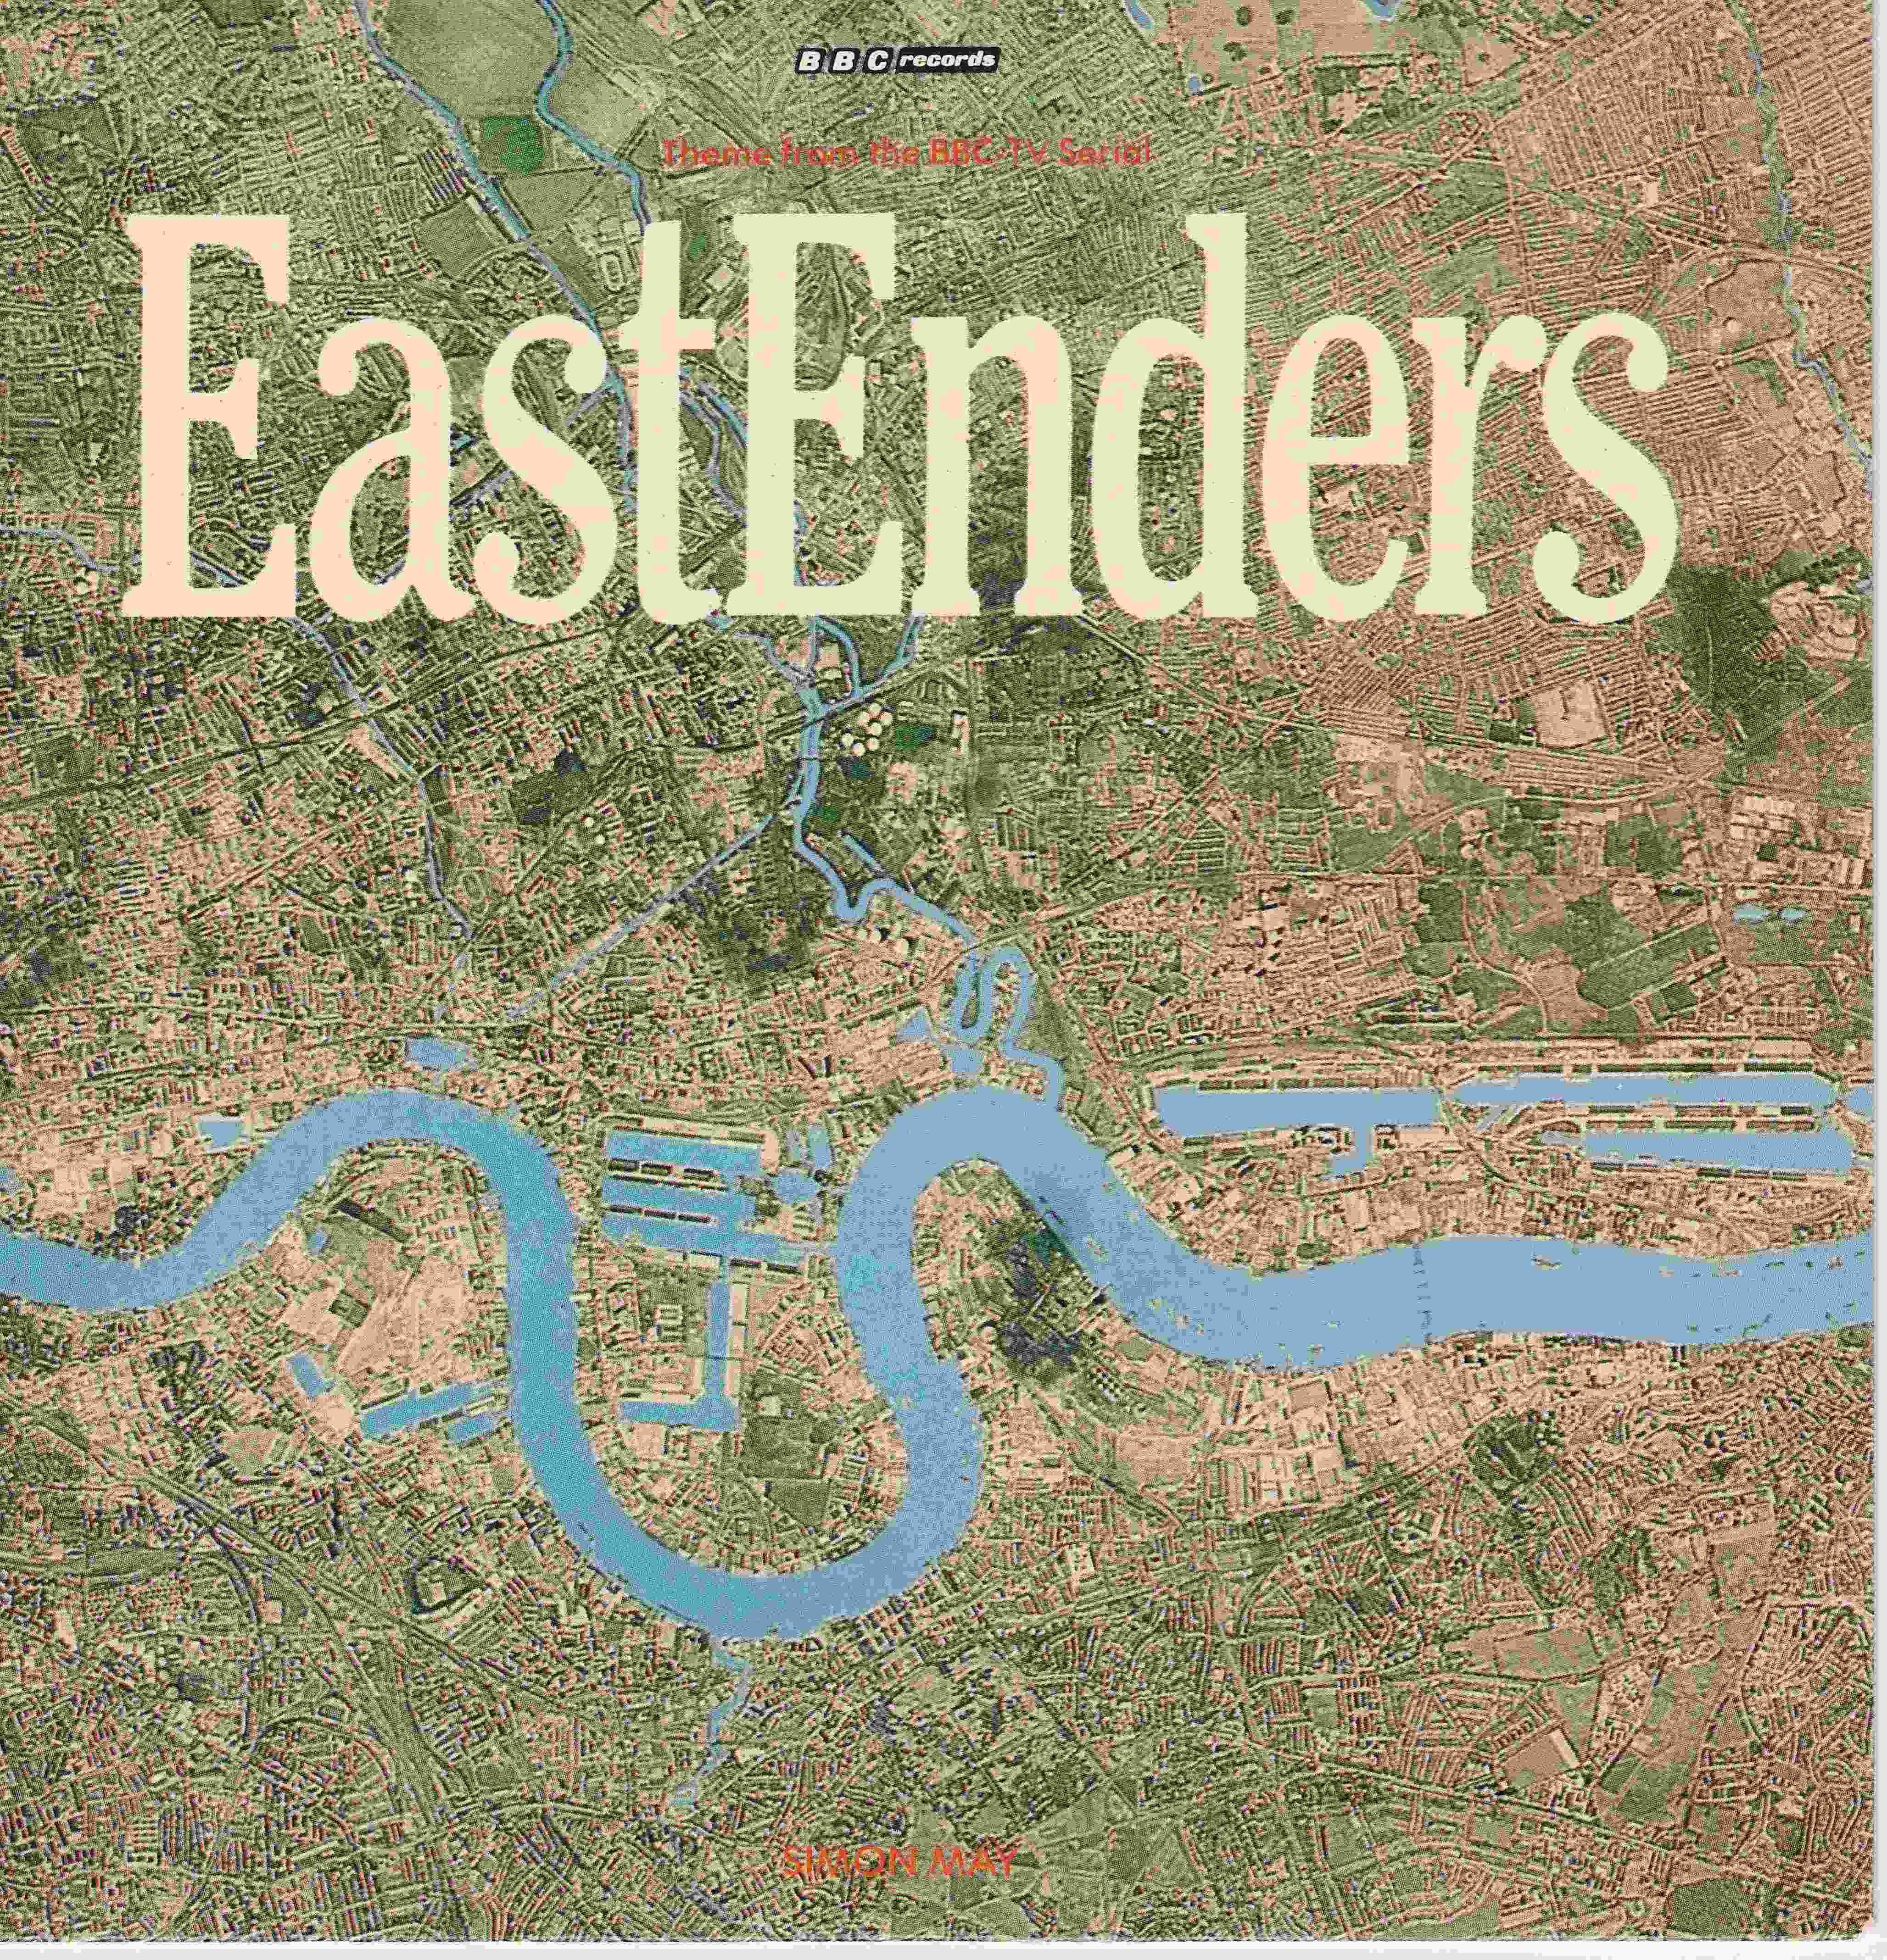 Picture of EastEnders by artist Simon May from the BBC singles - Records and Tapes library